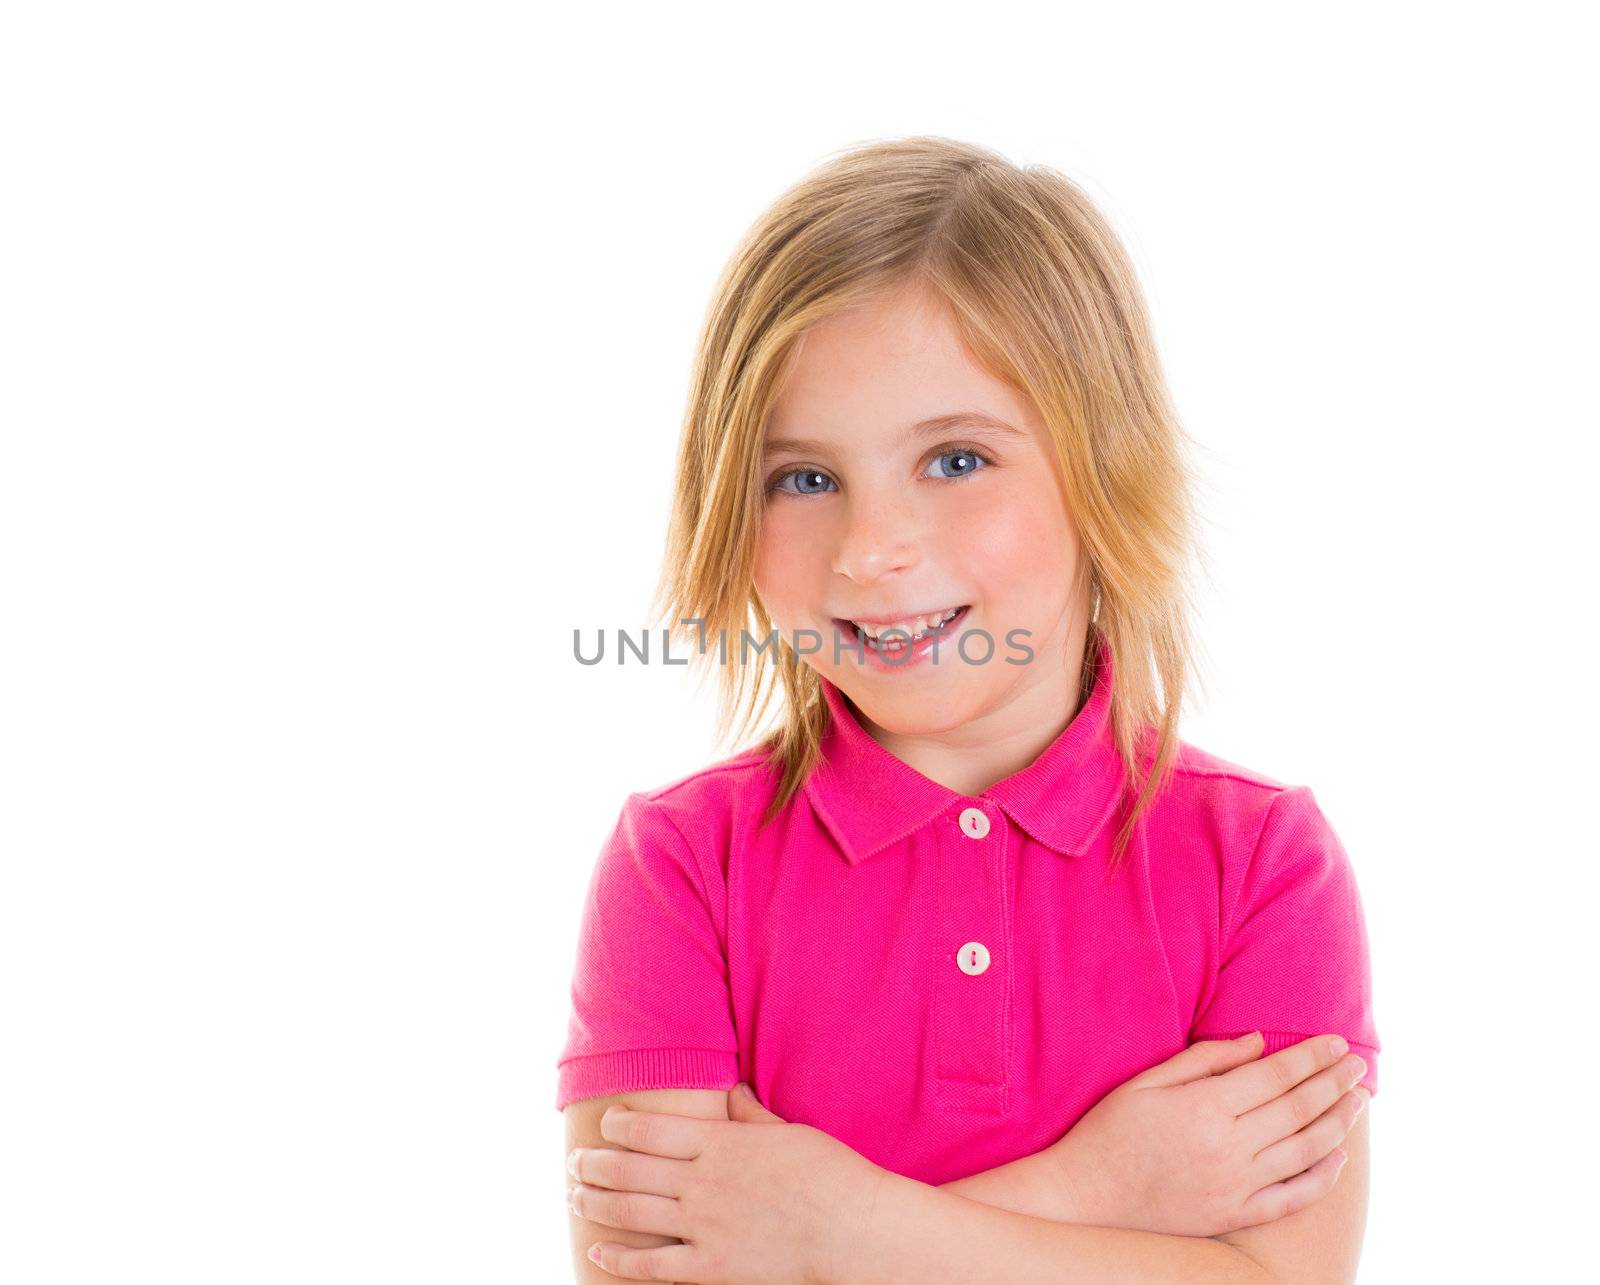 Blond child girl with pink t-shirt smiling portrait on white background